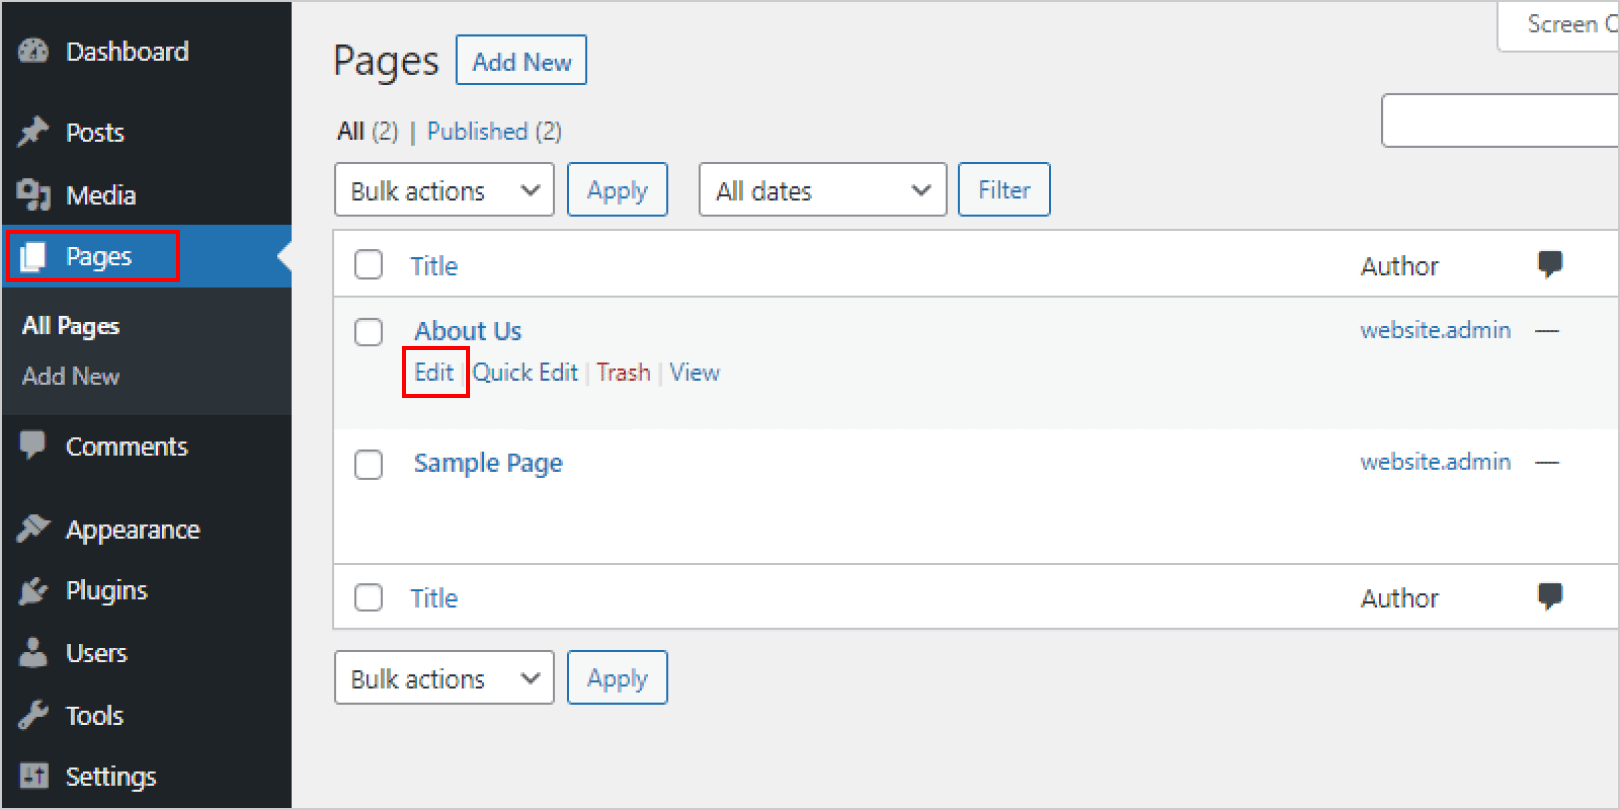 Or you can edit the existing pages from all pages and select the edit option